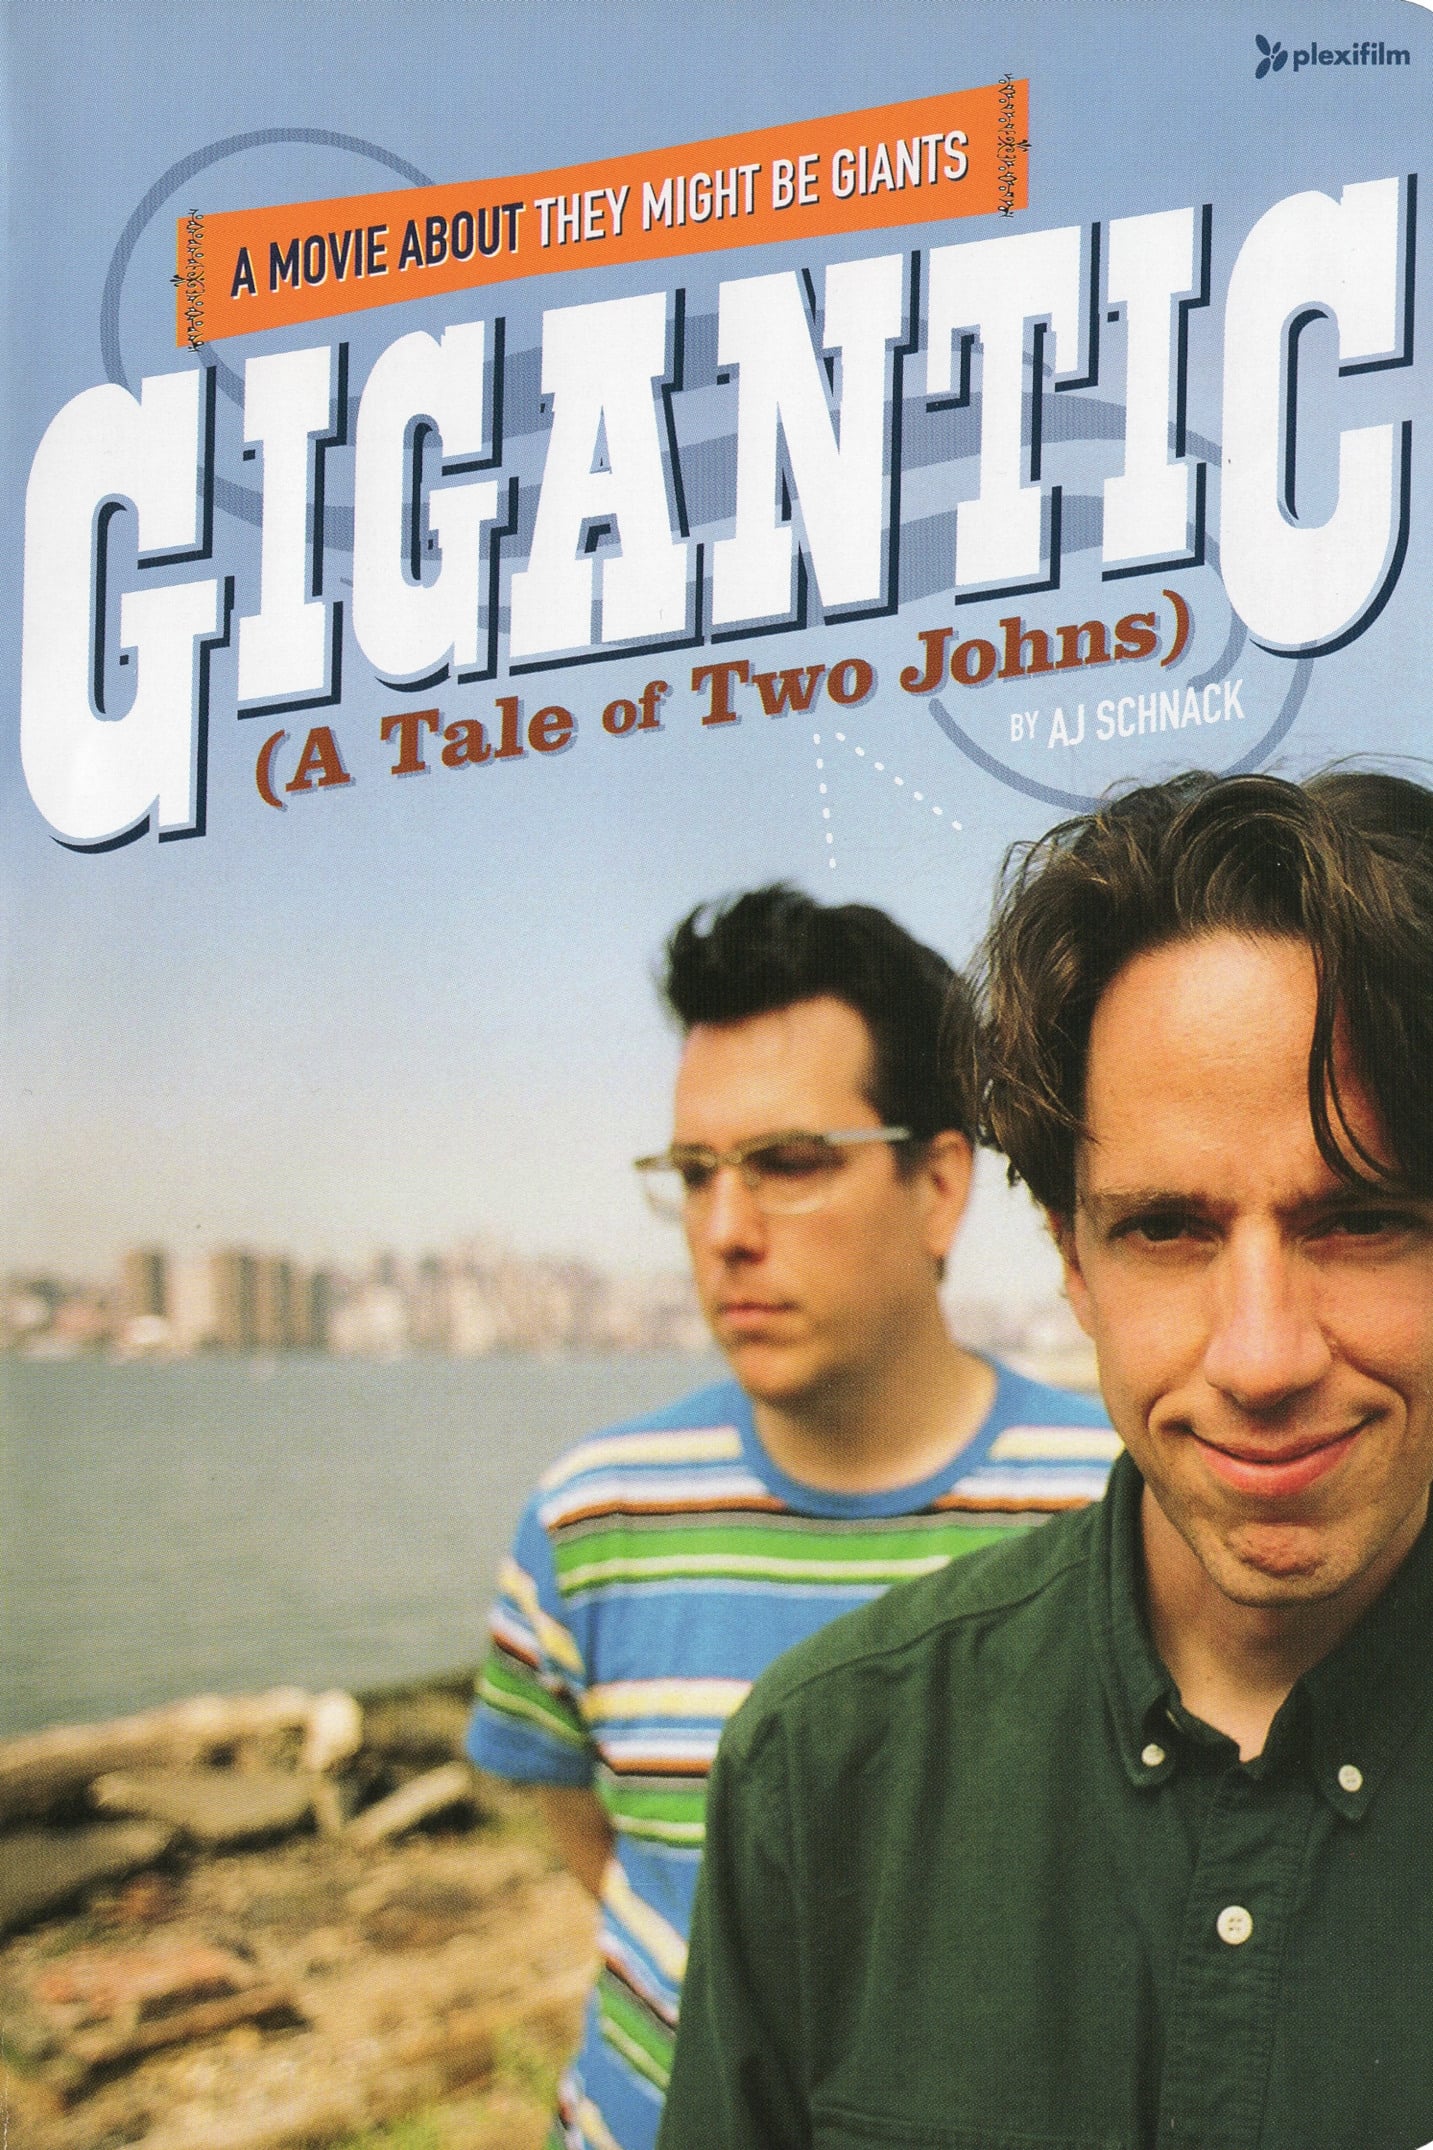 Gigantic (A Tale of Two Johns) (2002)